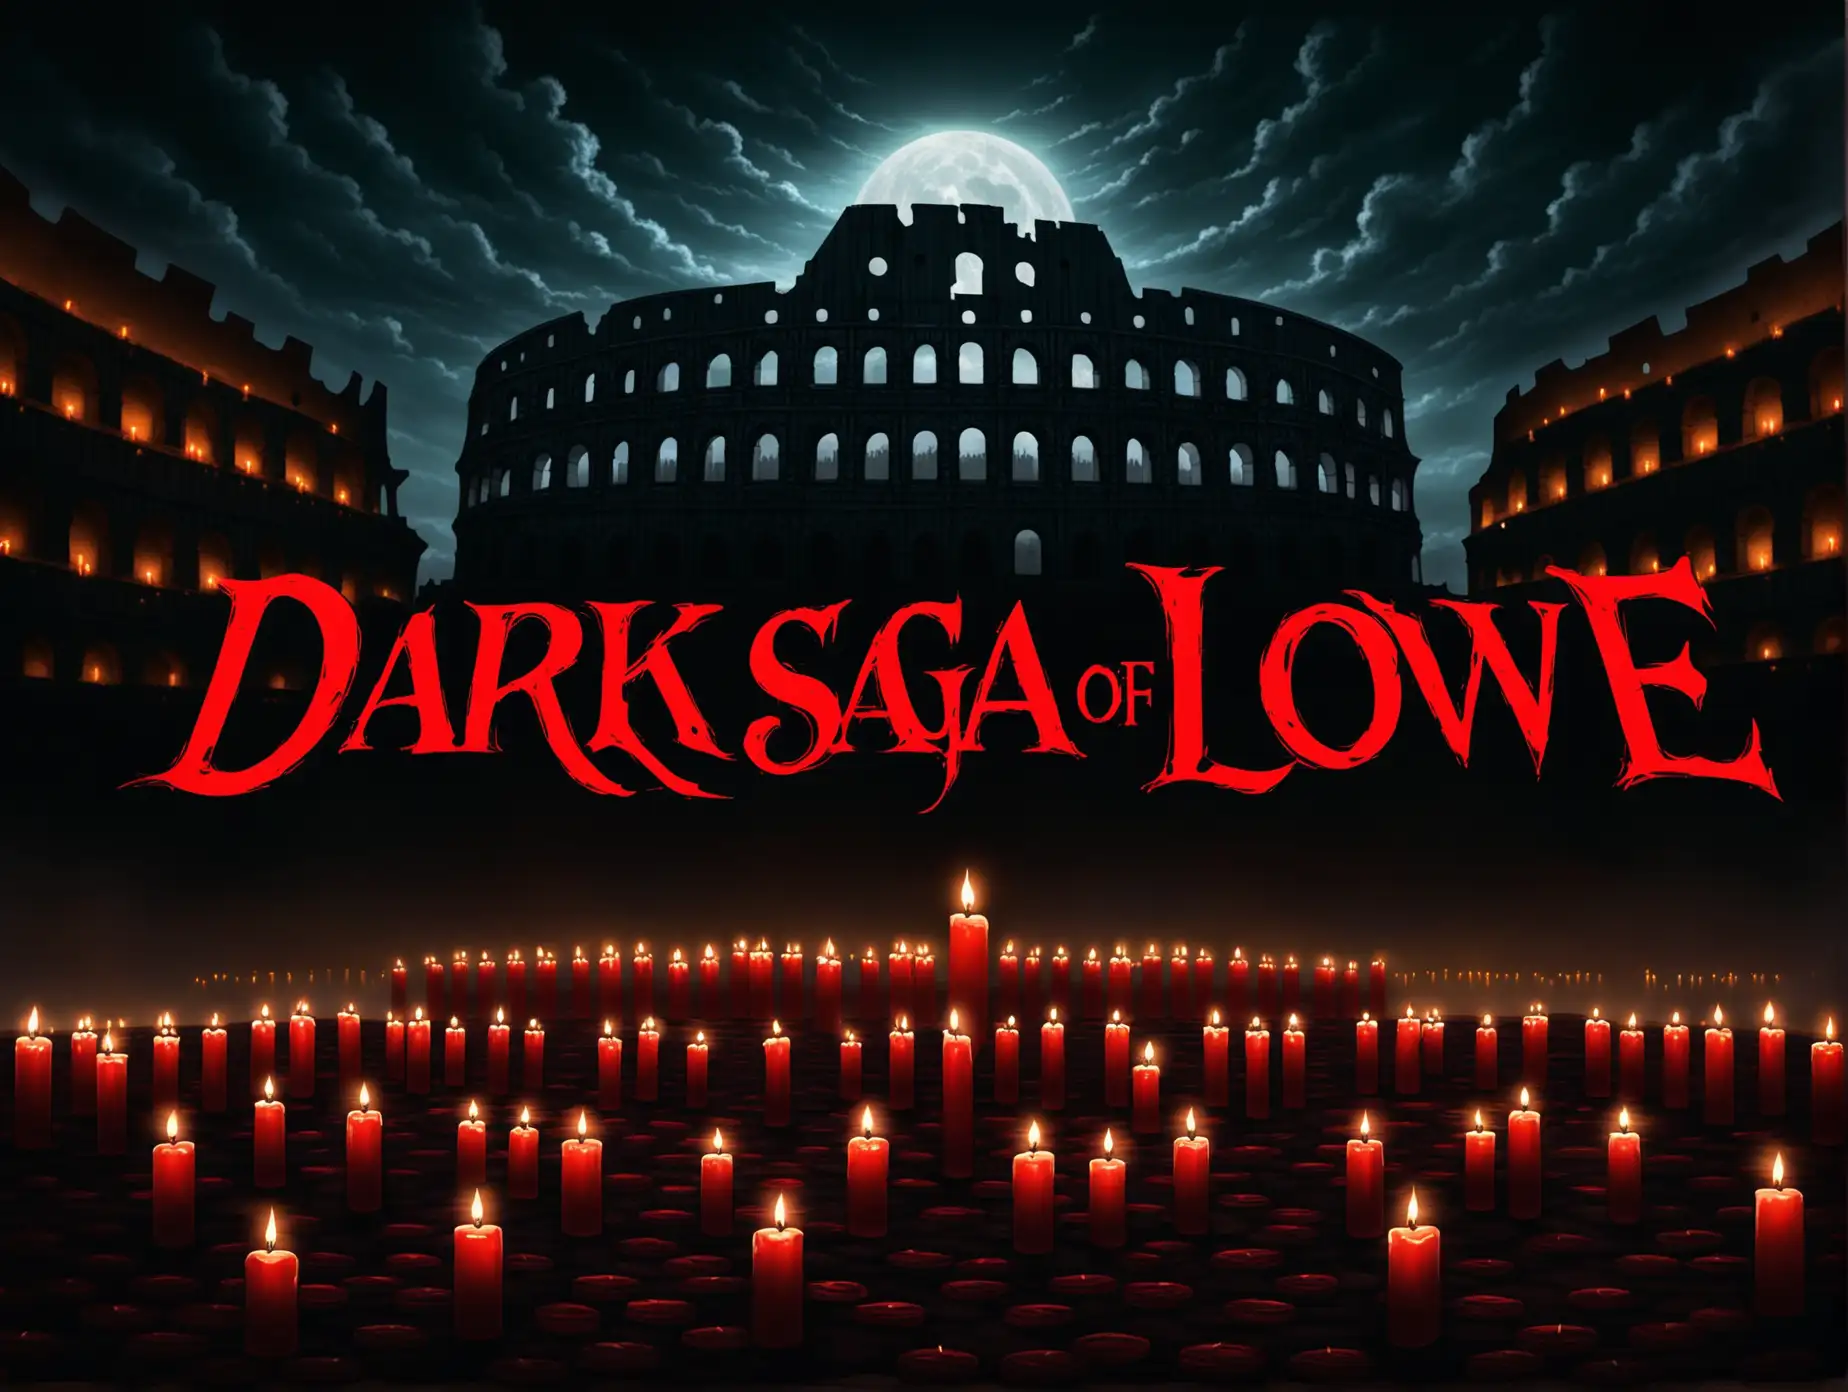 Dark screen with the inscription "Dark Saga of Love" in the center in red letters, candles, Coliseum in the background, gloomy atmosphere, dark fantasy